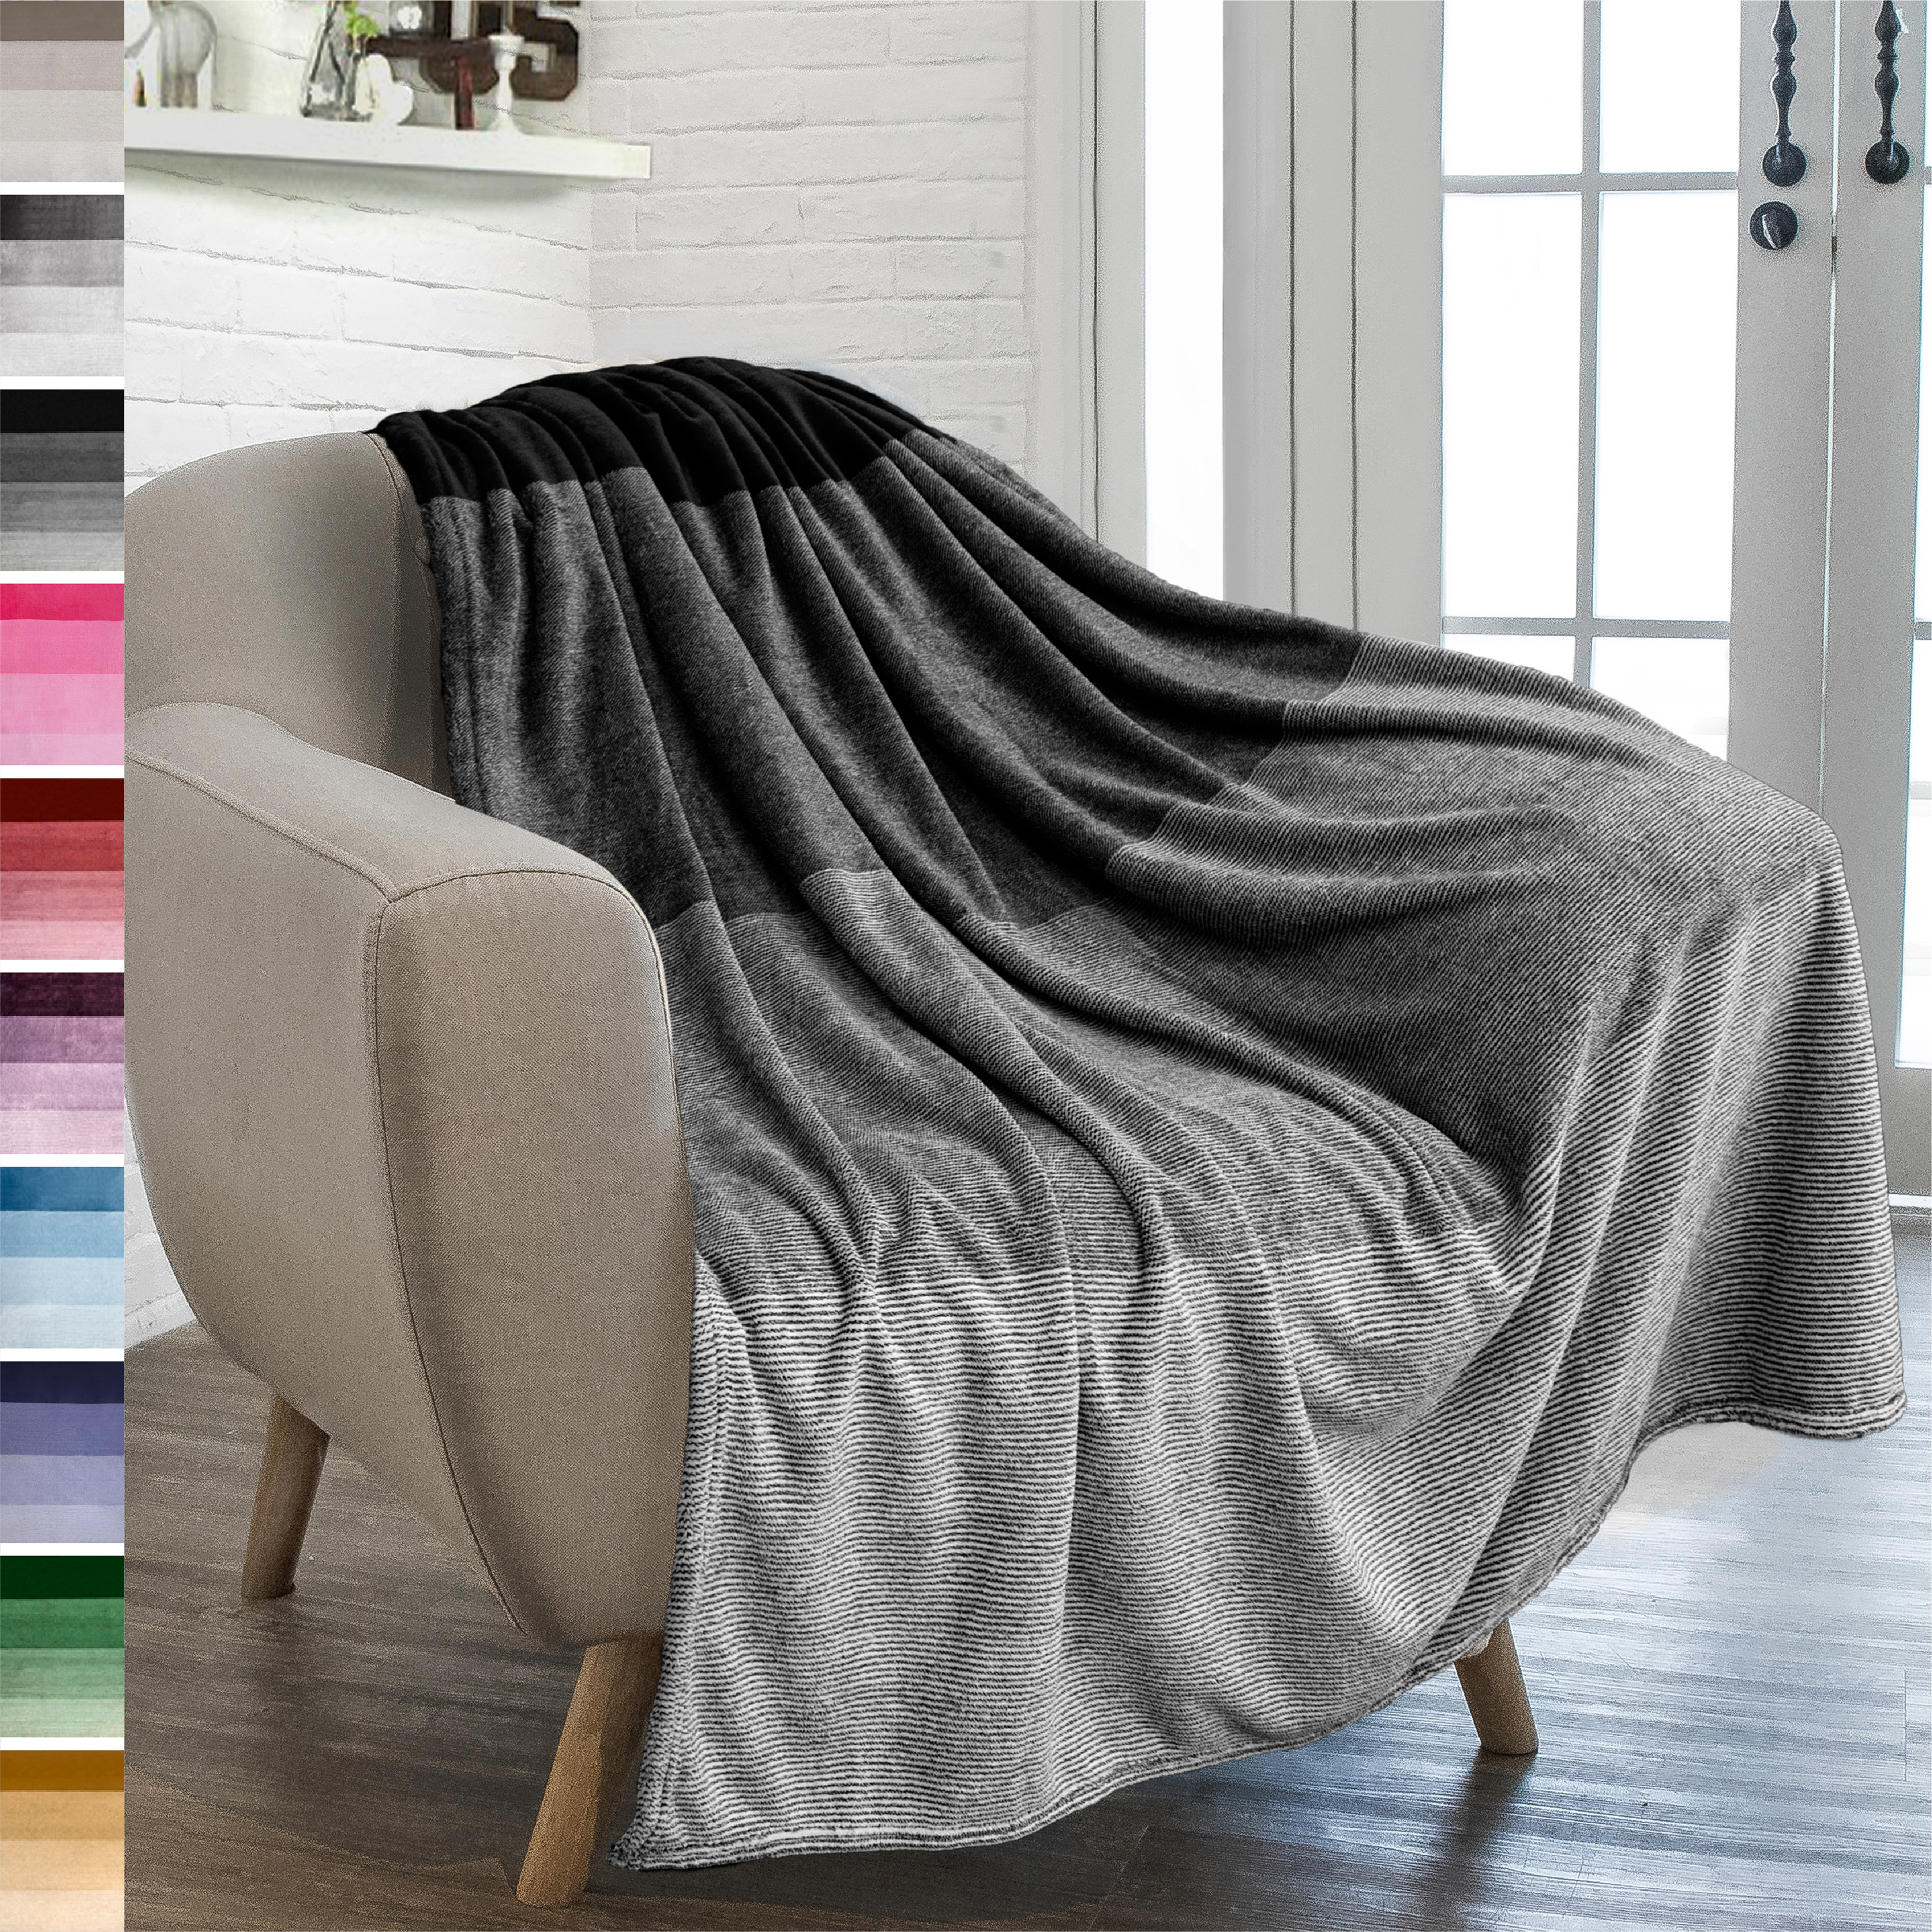 Super Soft Lightweight Fleece Warm Throw Blanket for Couch Sofa Bed Microfiber 